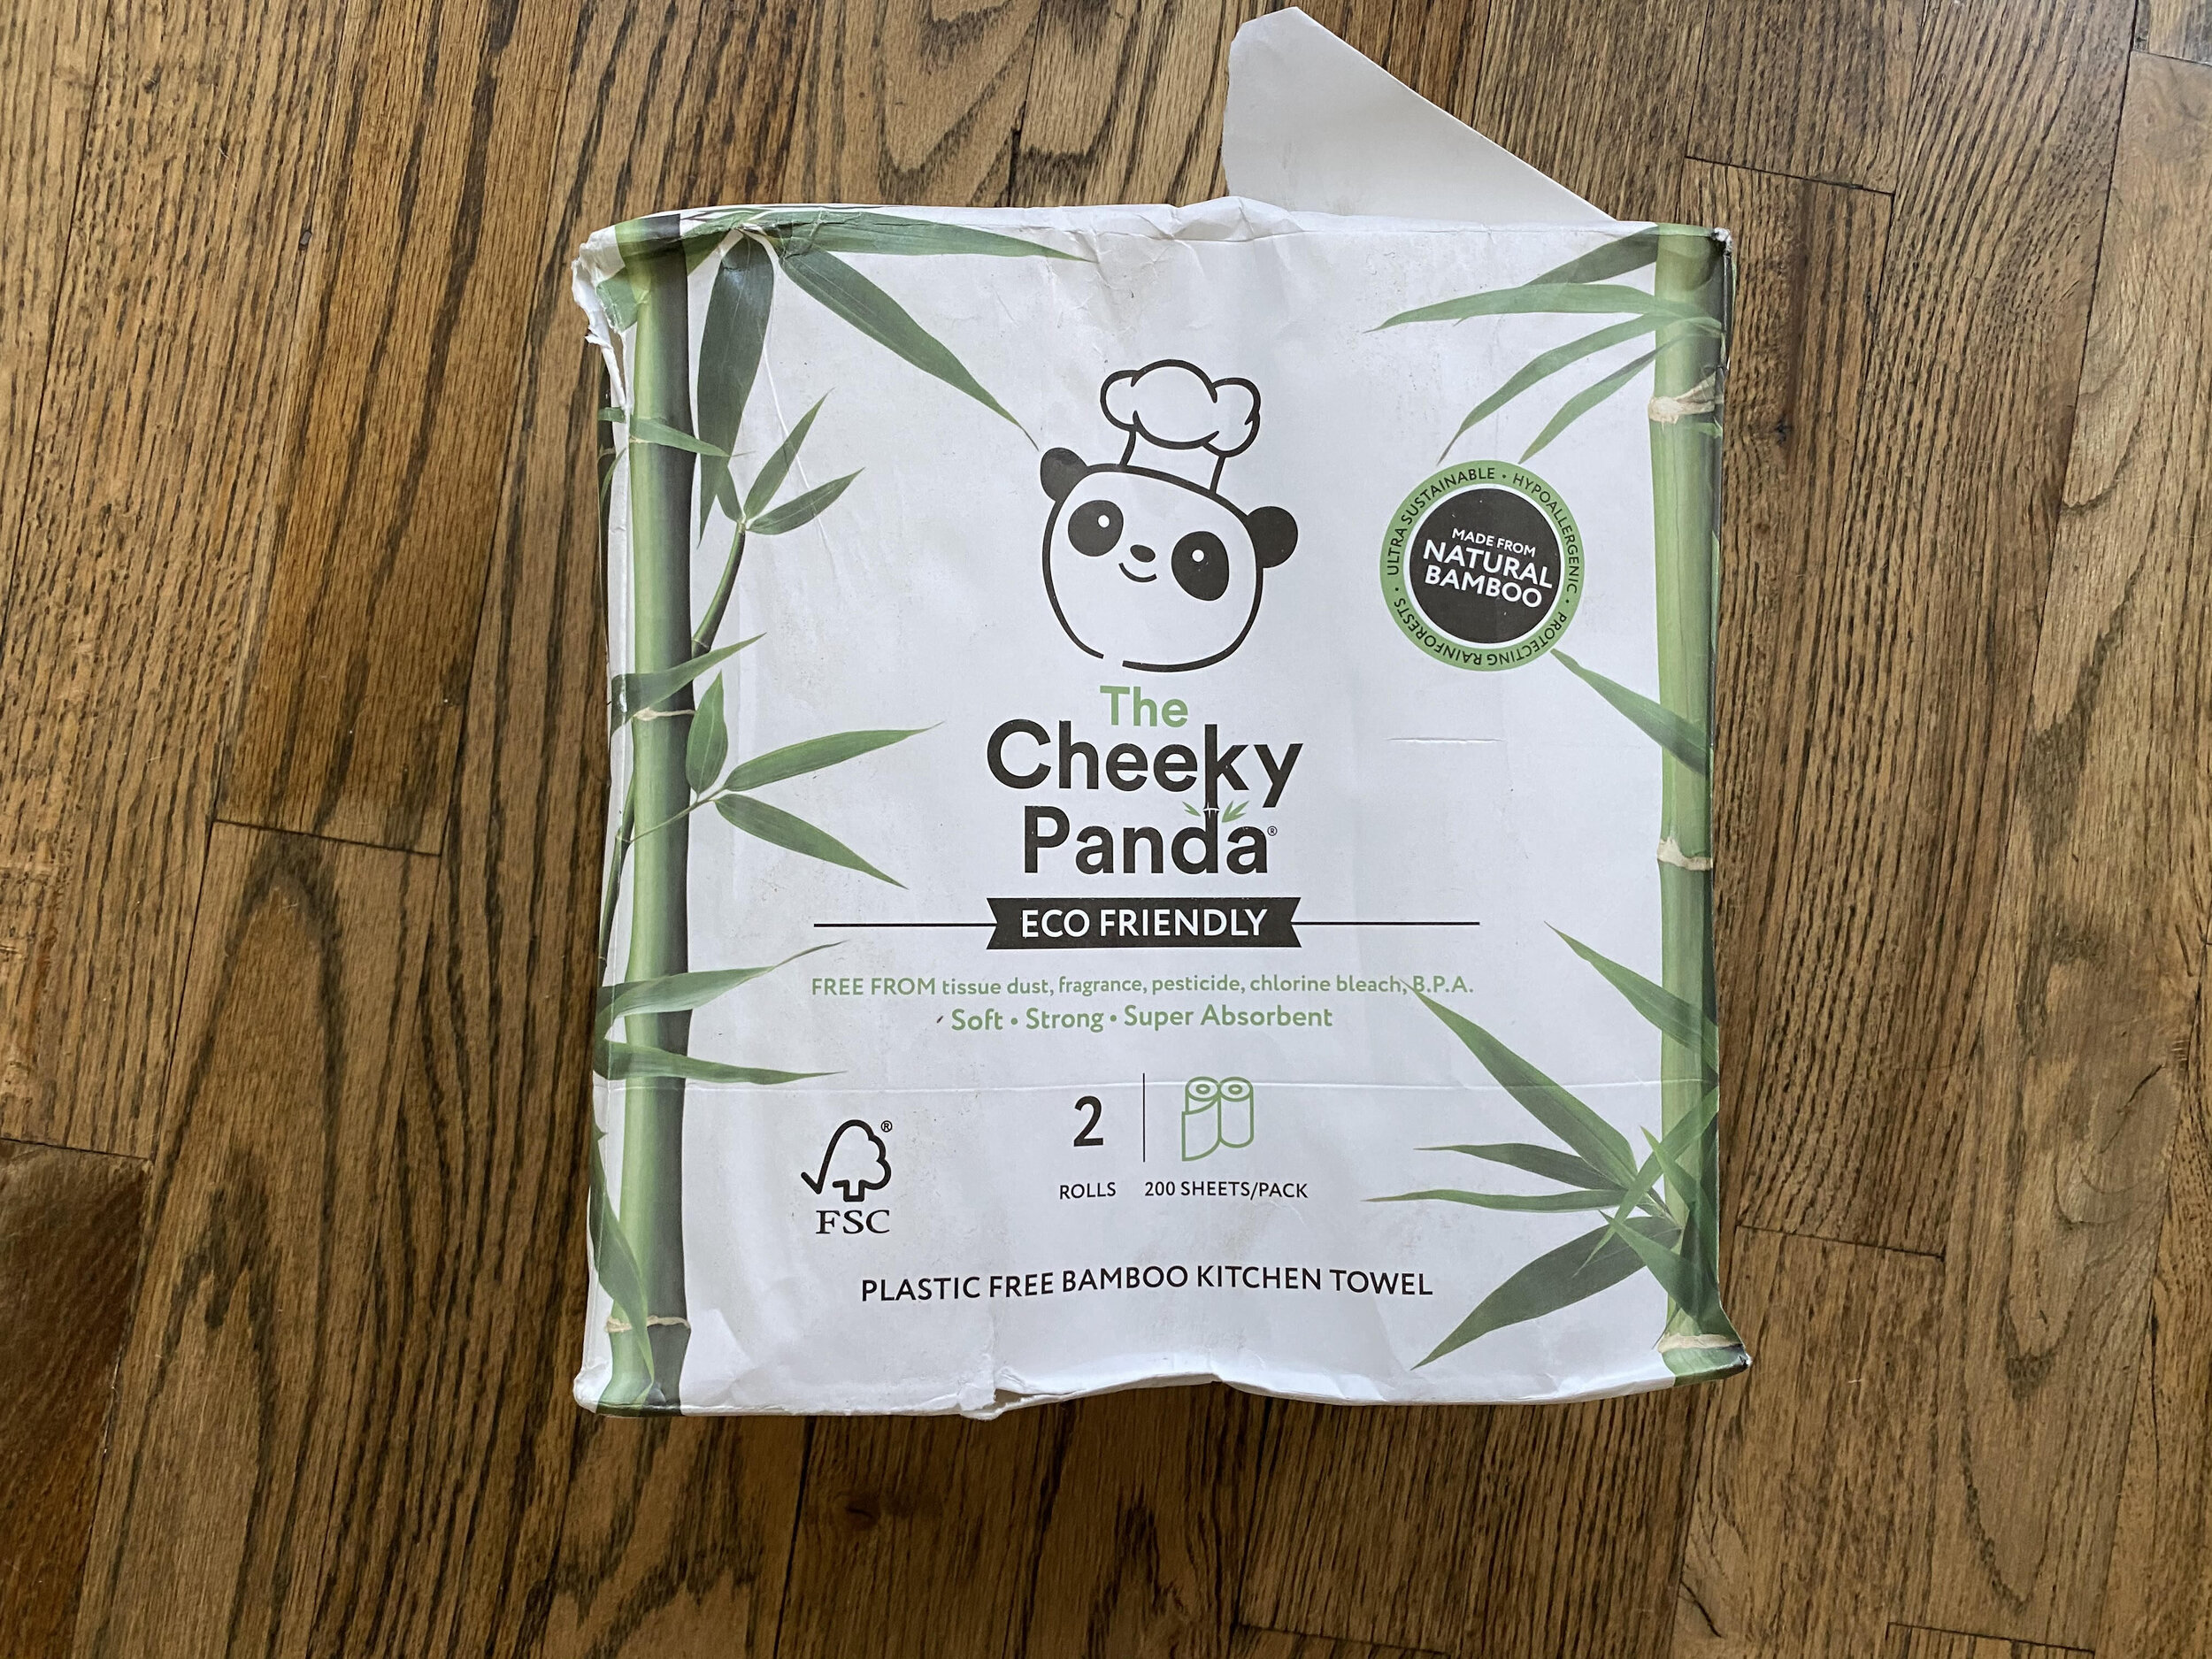 Plastic-Free The Cheeky Panda – Bamboo Paper Towel Kitchen Rolls Multipurpose Pack of 2 Rolls Strong & Sustainable Super Absorbent Eco-Friendly | Biodegradable 2-Ply 